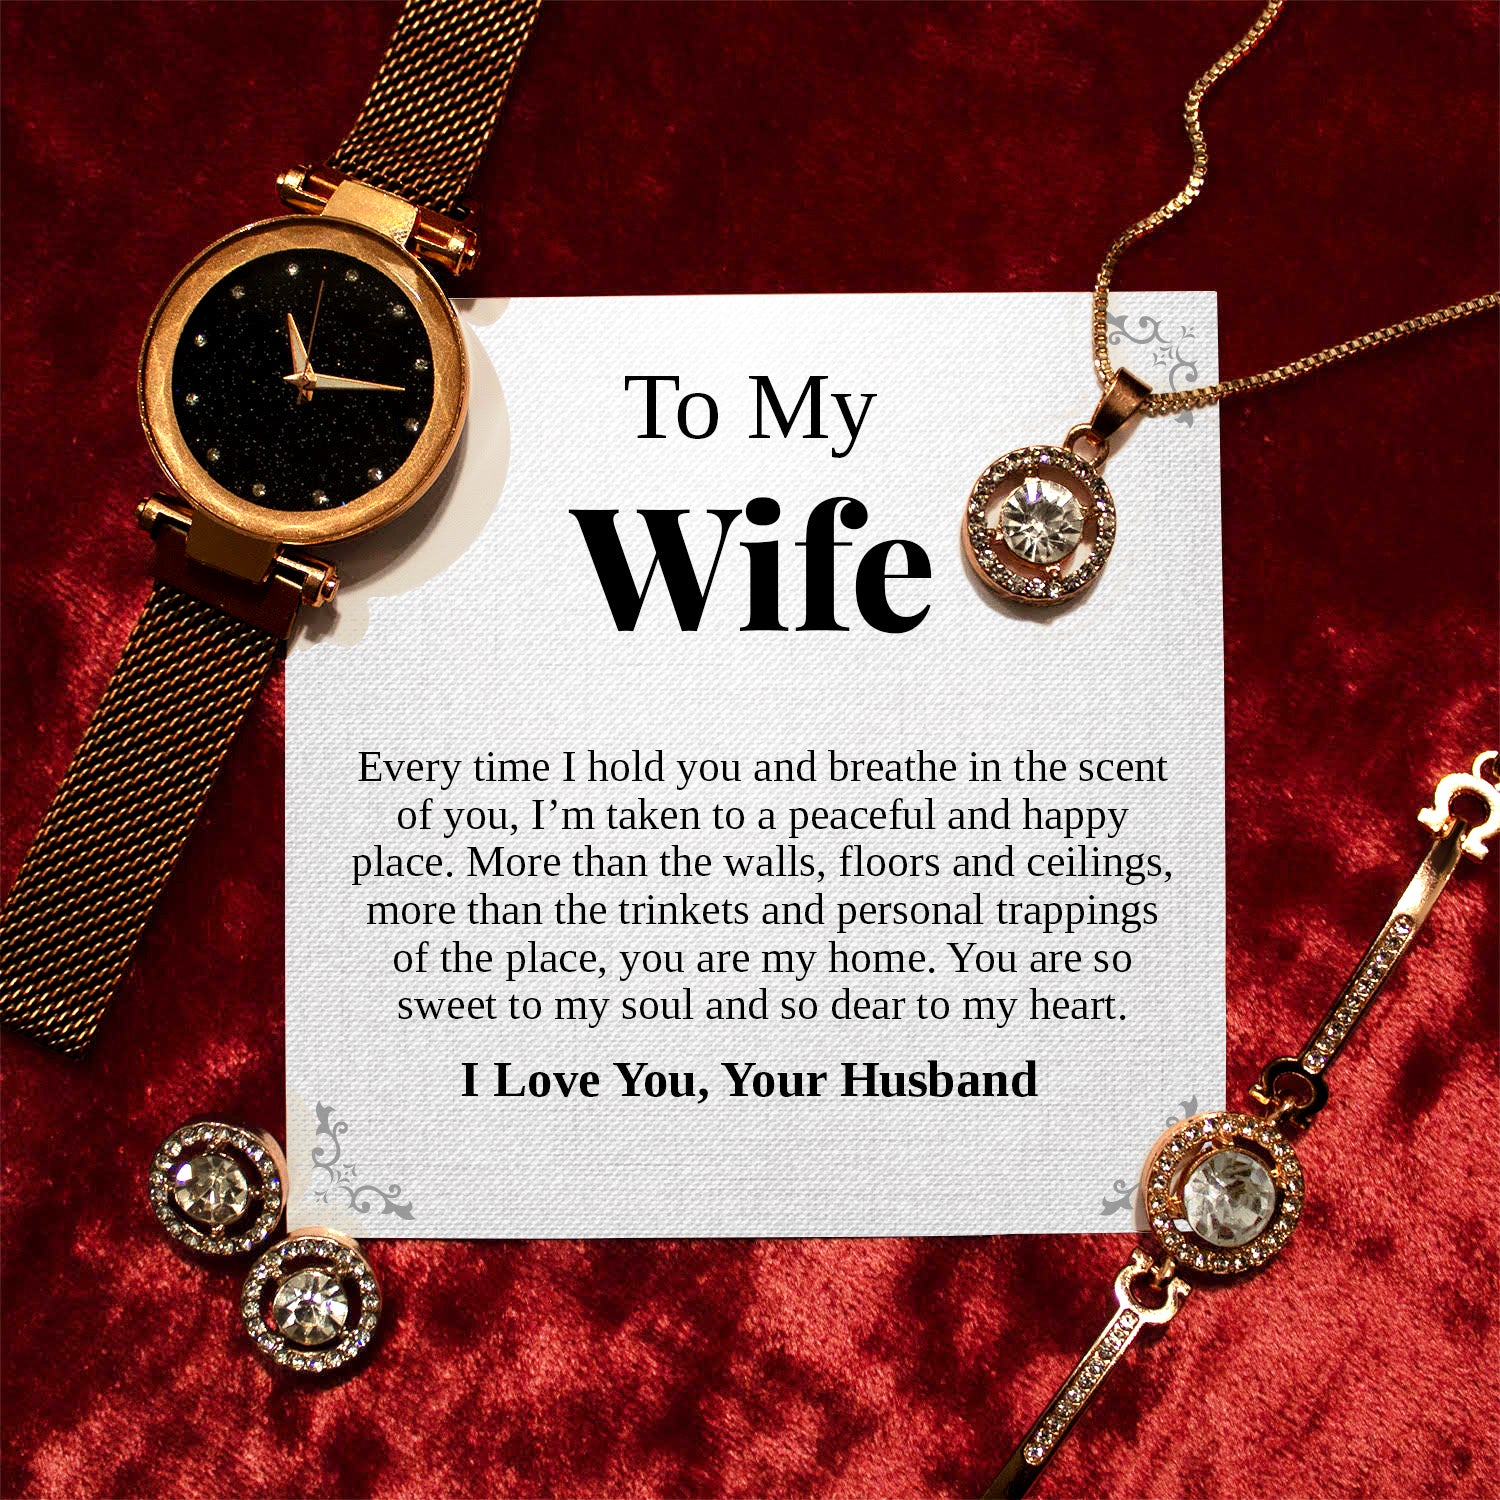 To My Wife | "The Scent of You" | Cosmopolitan Set